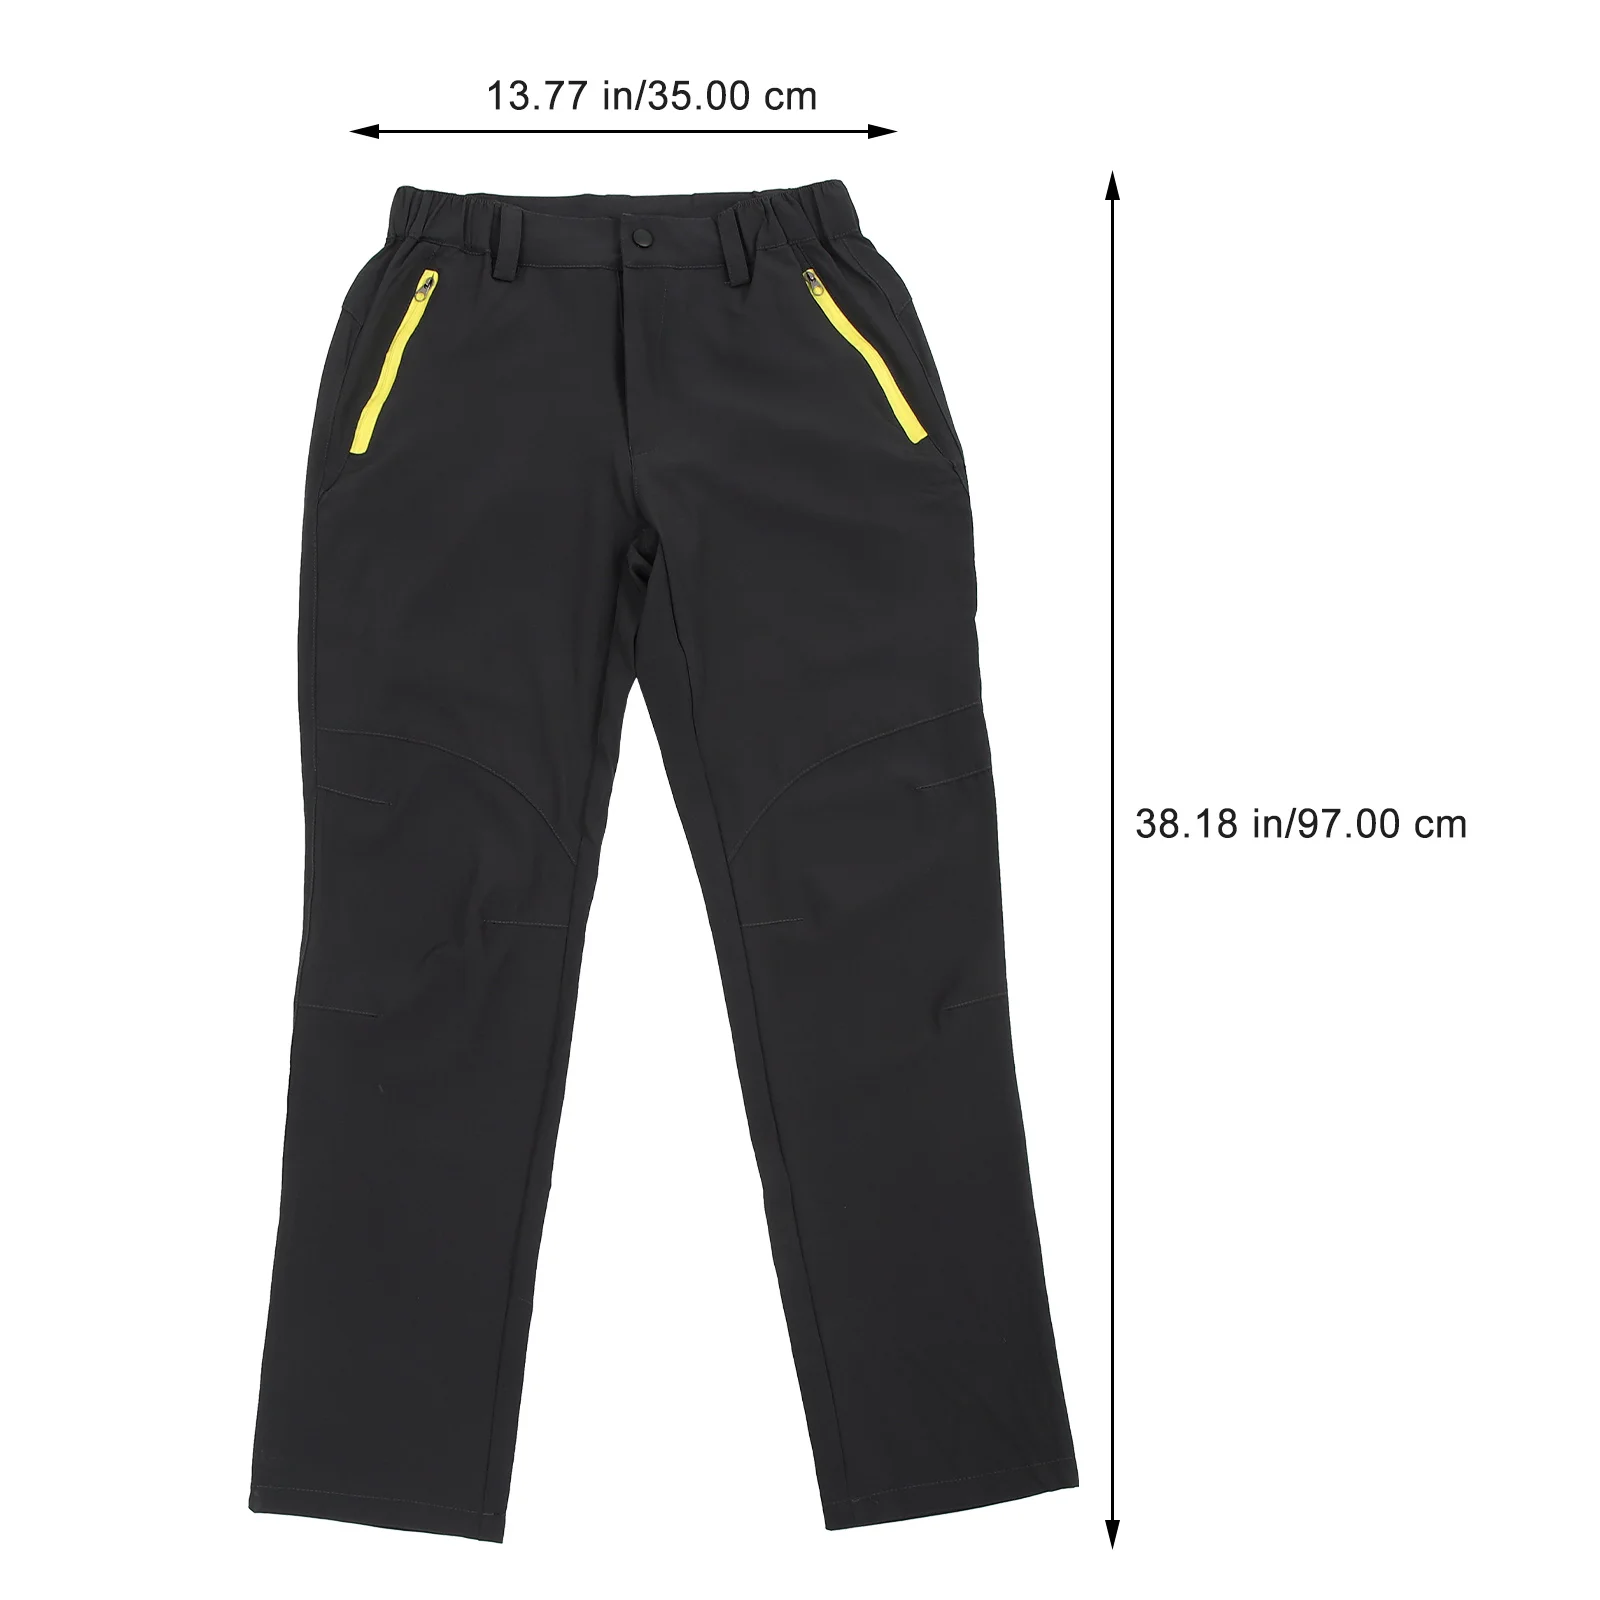 

Travel Clothes Women's Climbing Pants Hiking Outdoor 95X33CM Grey 94% Polyester 6 Spandex Travel